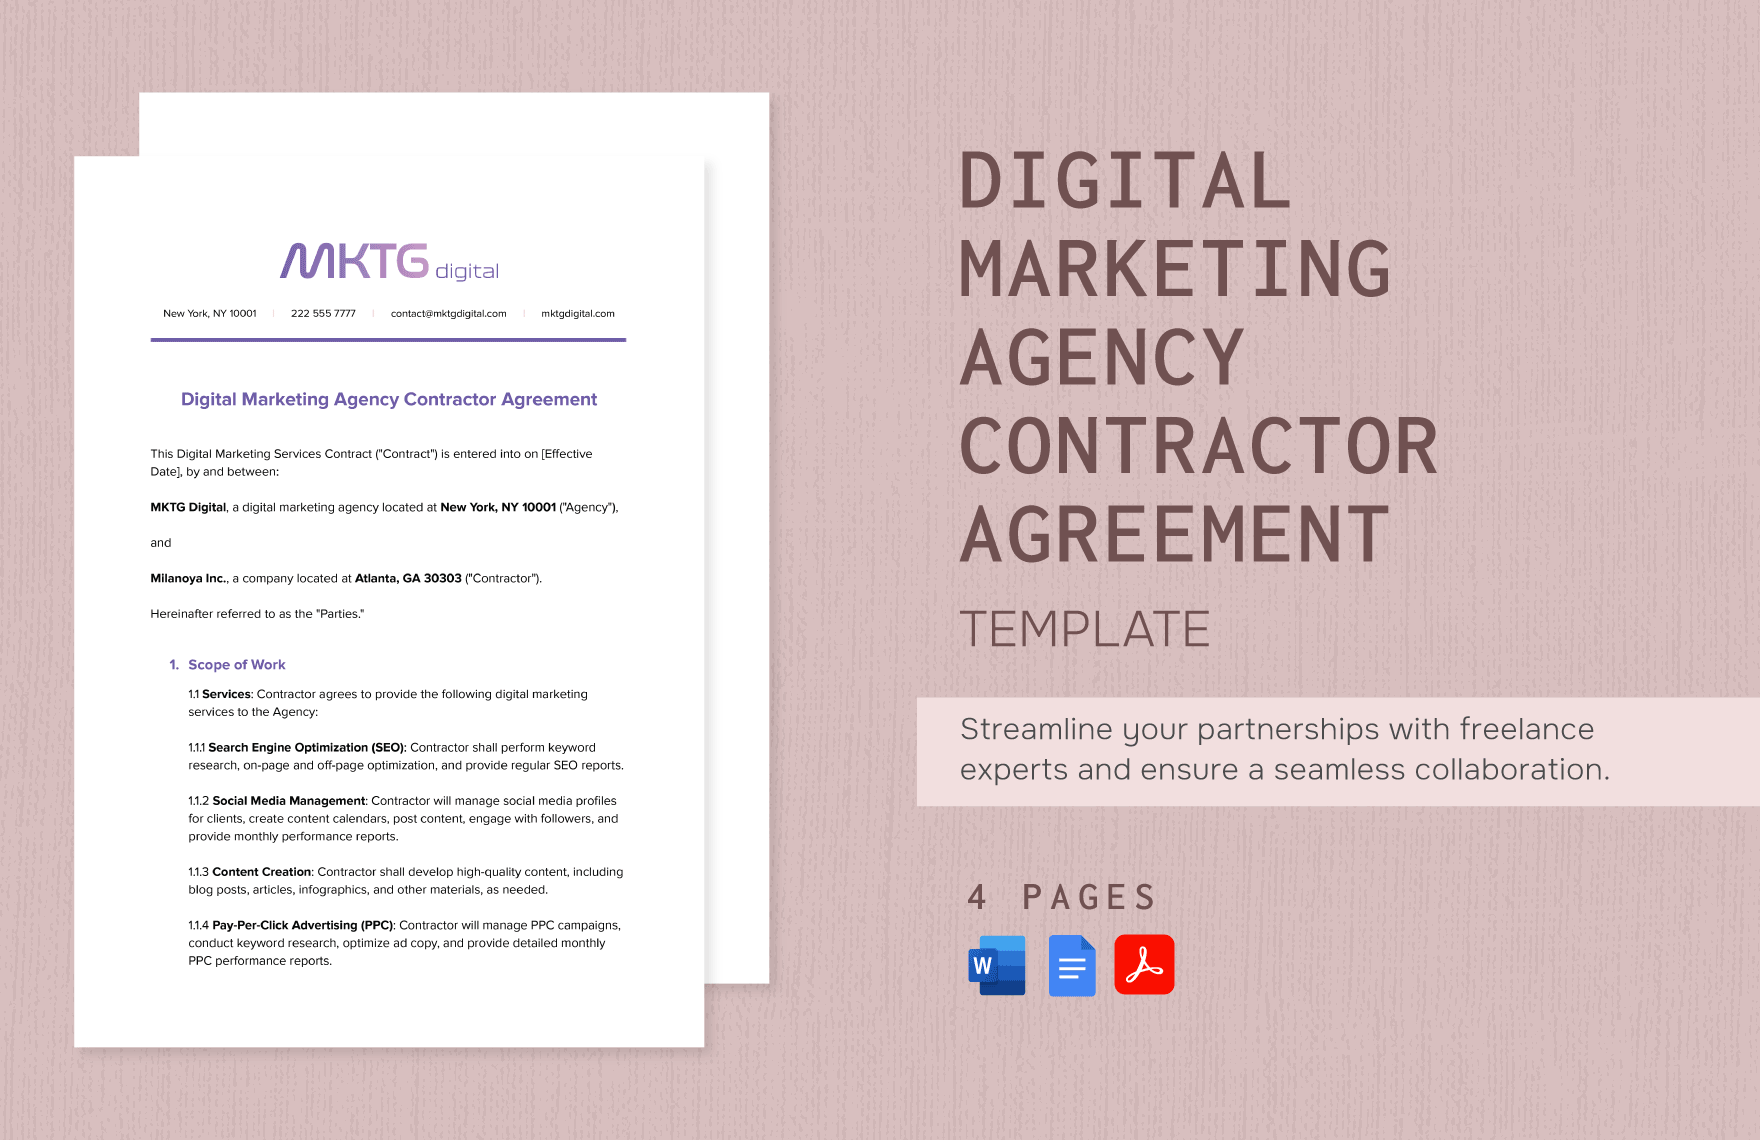 Digital Marketing Agency Contractor Agreement Template